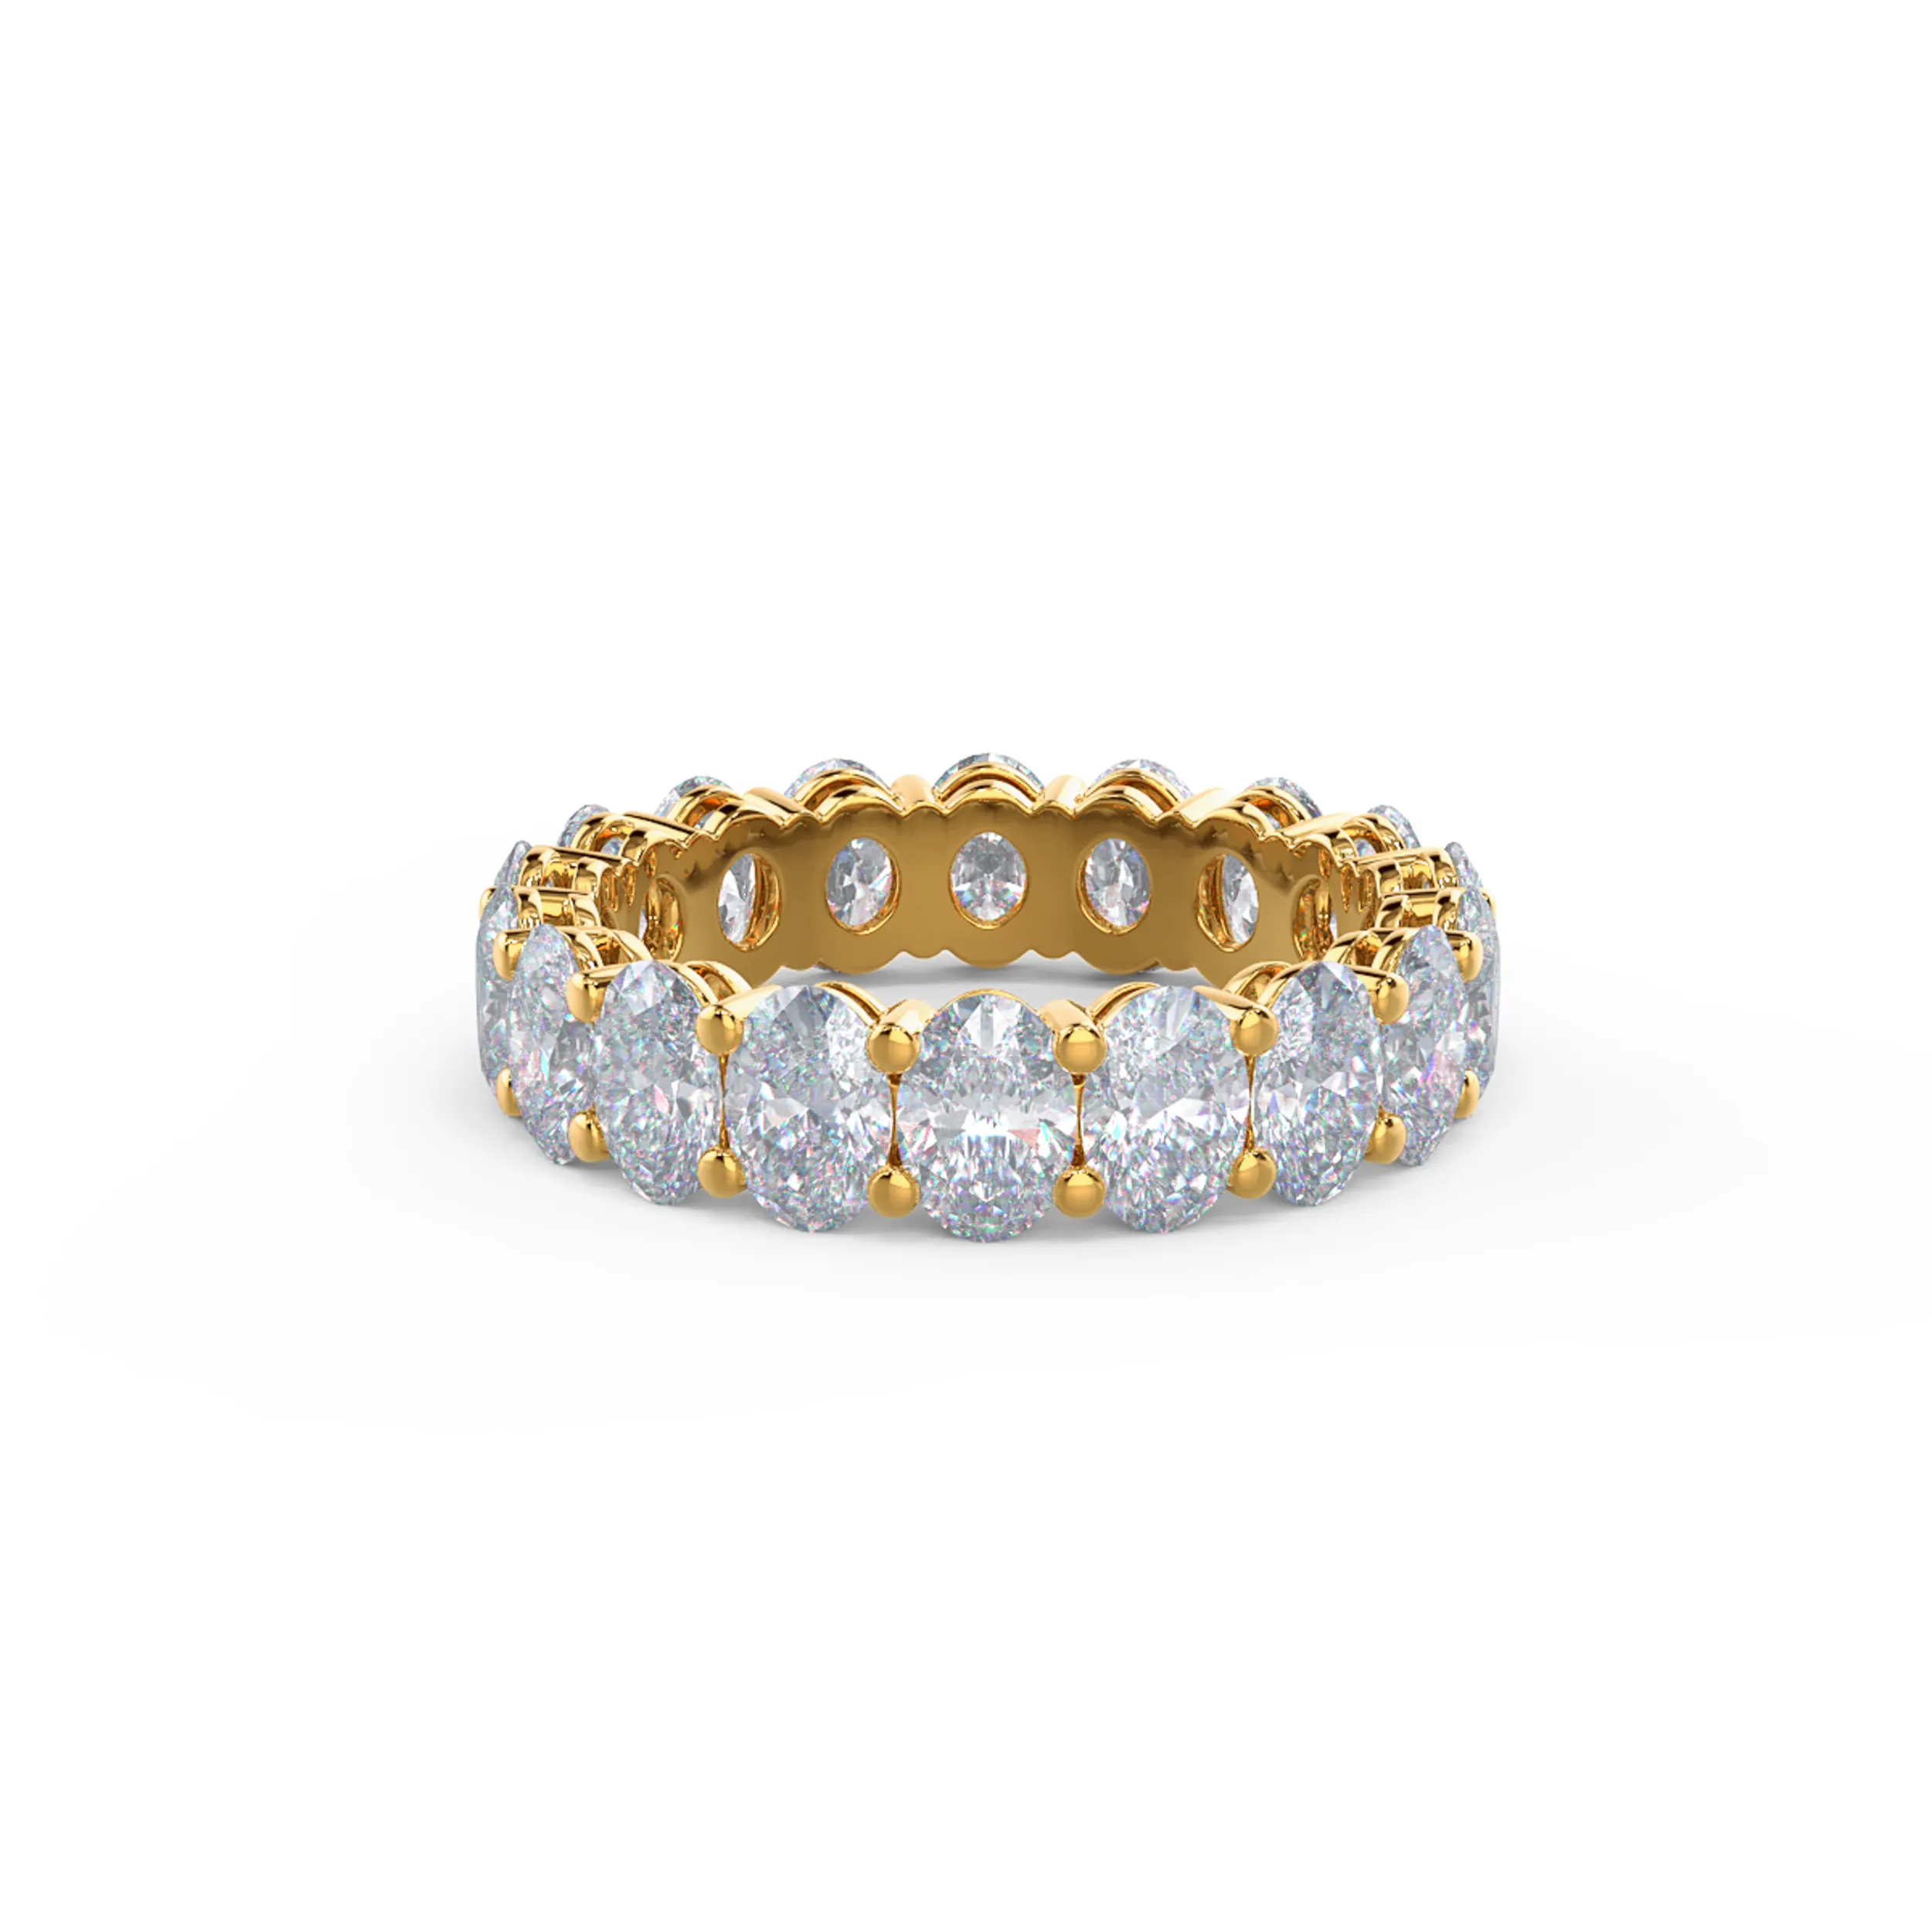 Hand Selected 5.5 ctw Diamonds set in Yellow Gold Oval Basket Eternity Band (Main View)